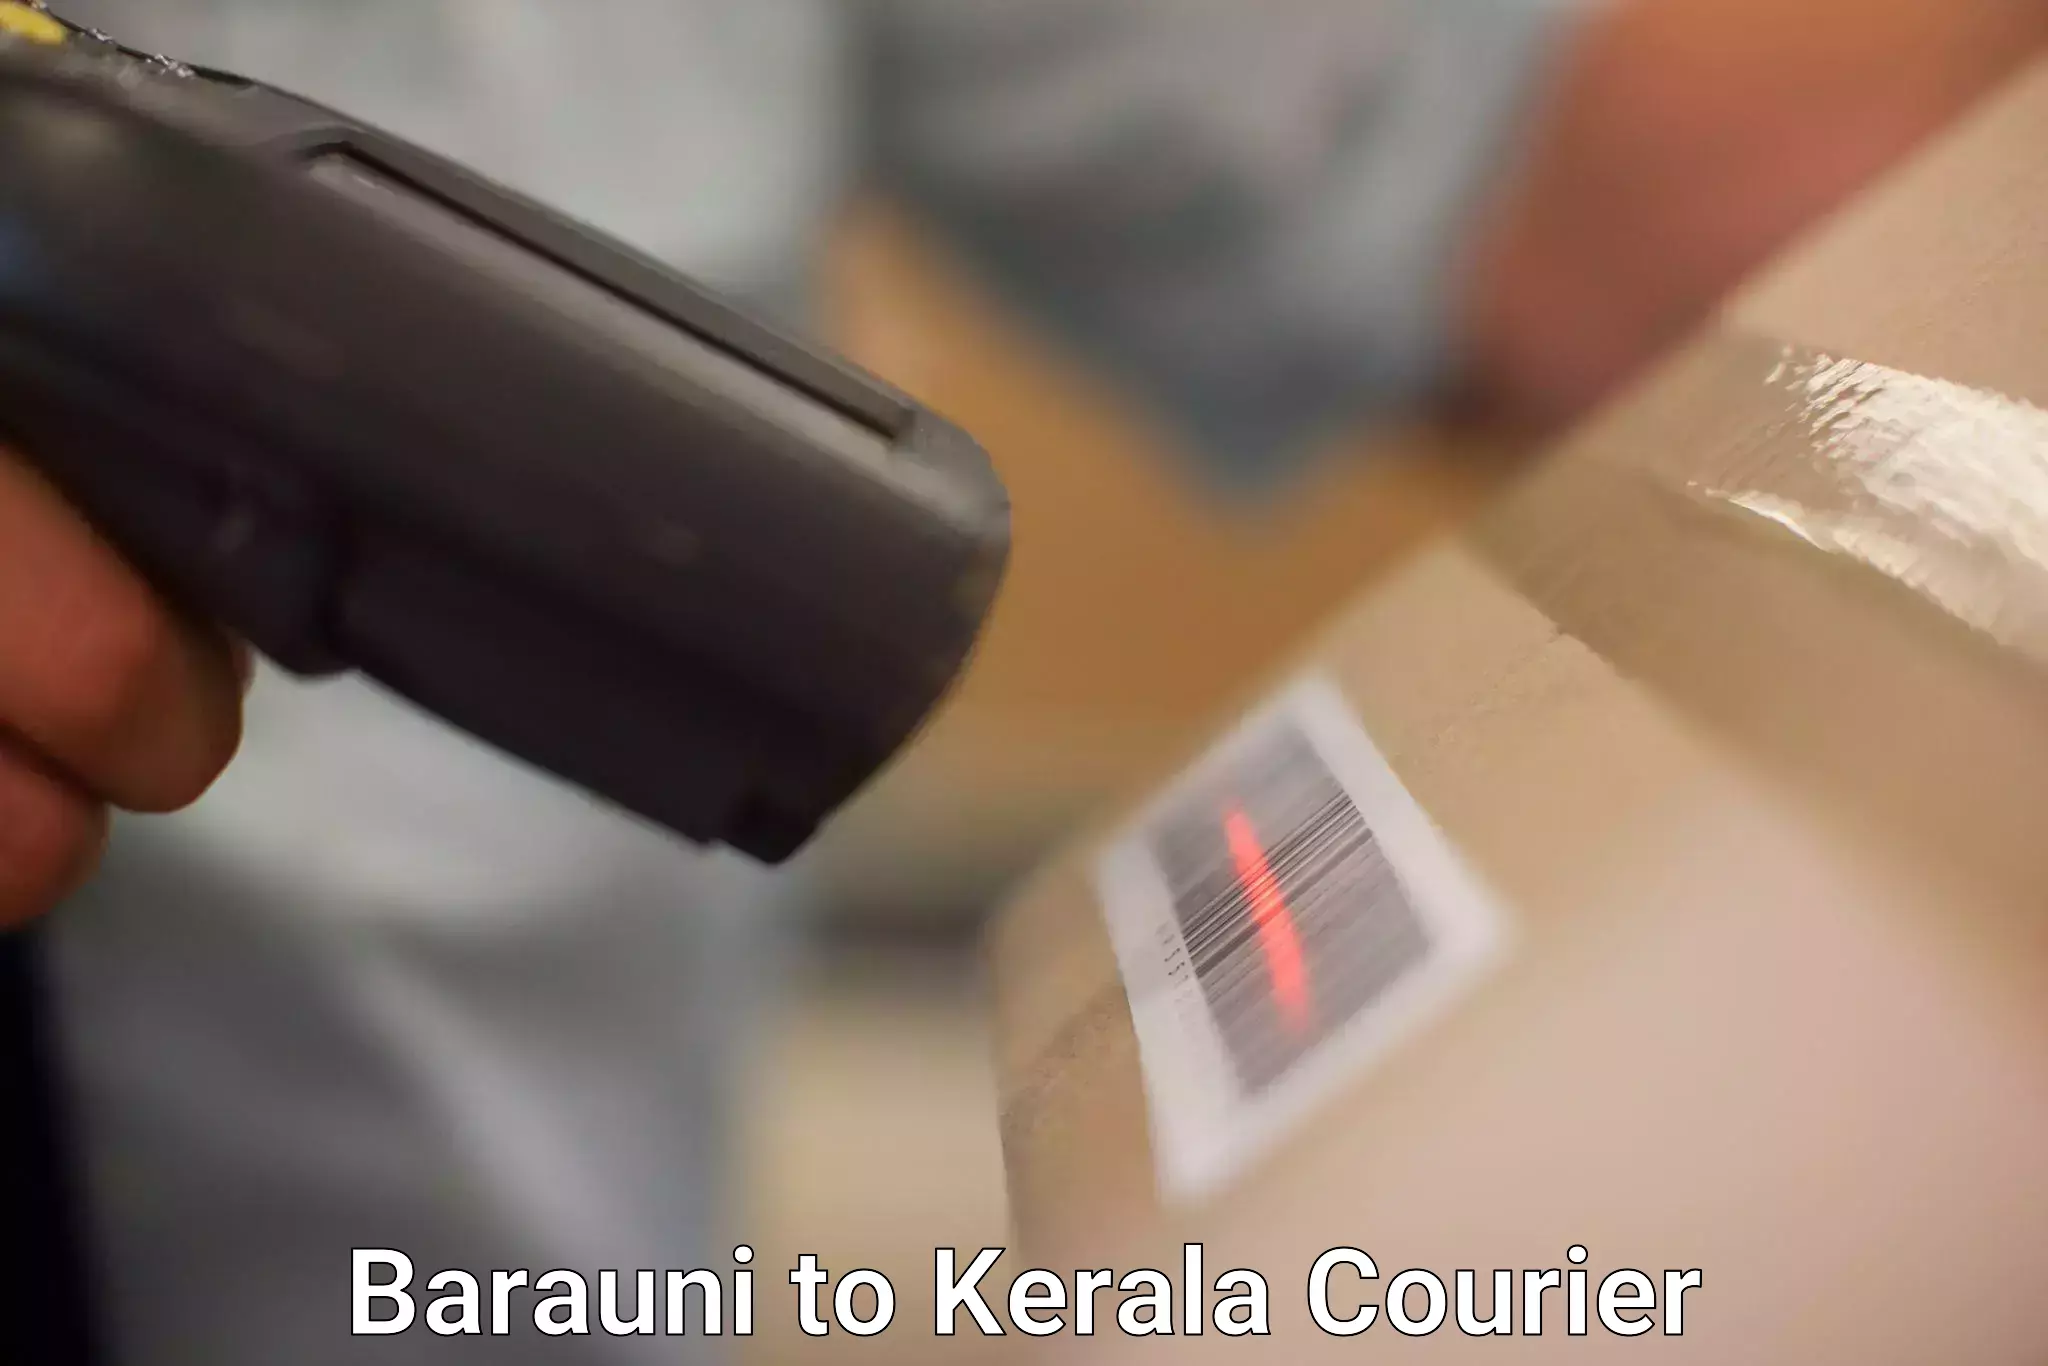 Package delivery network Barauni to Kerala